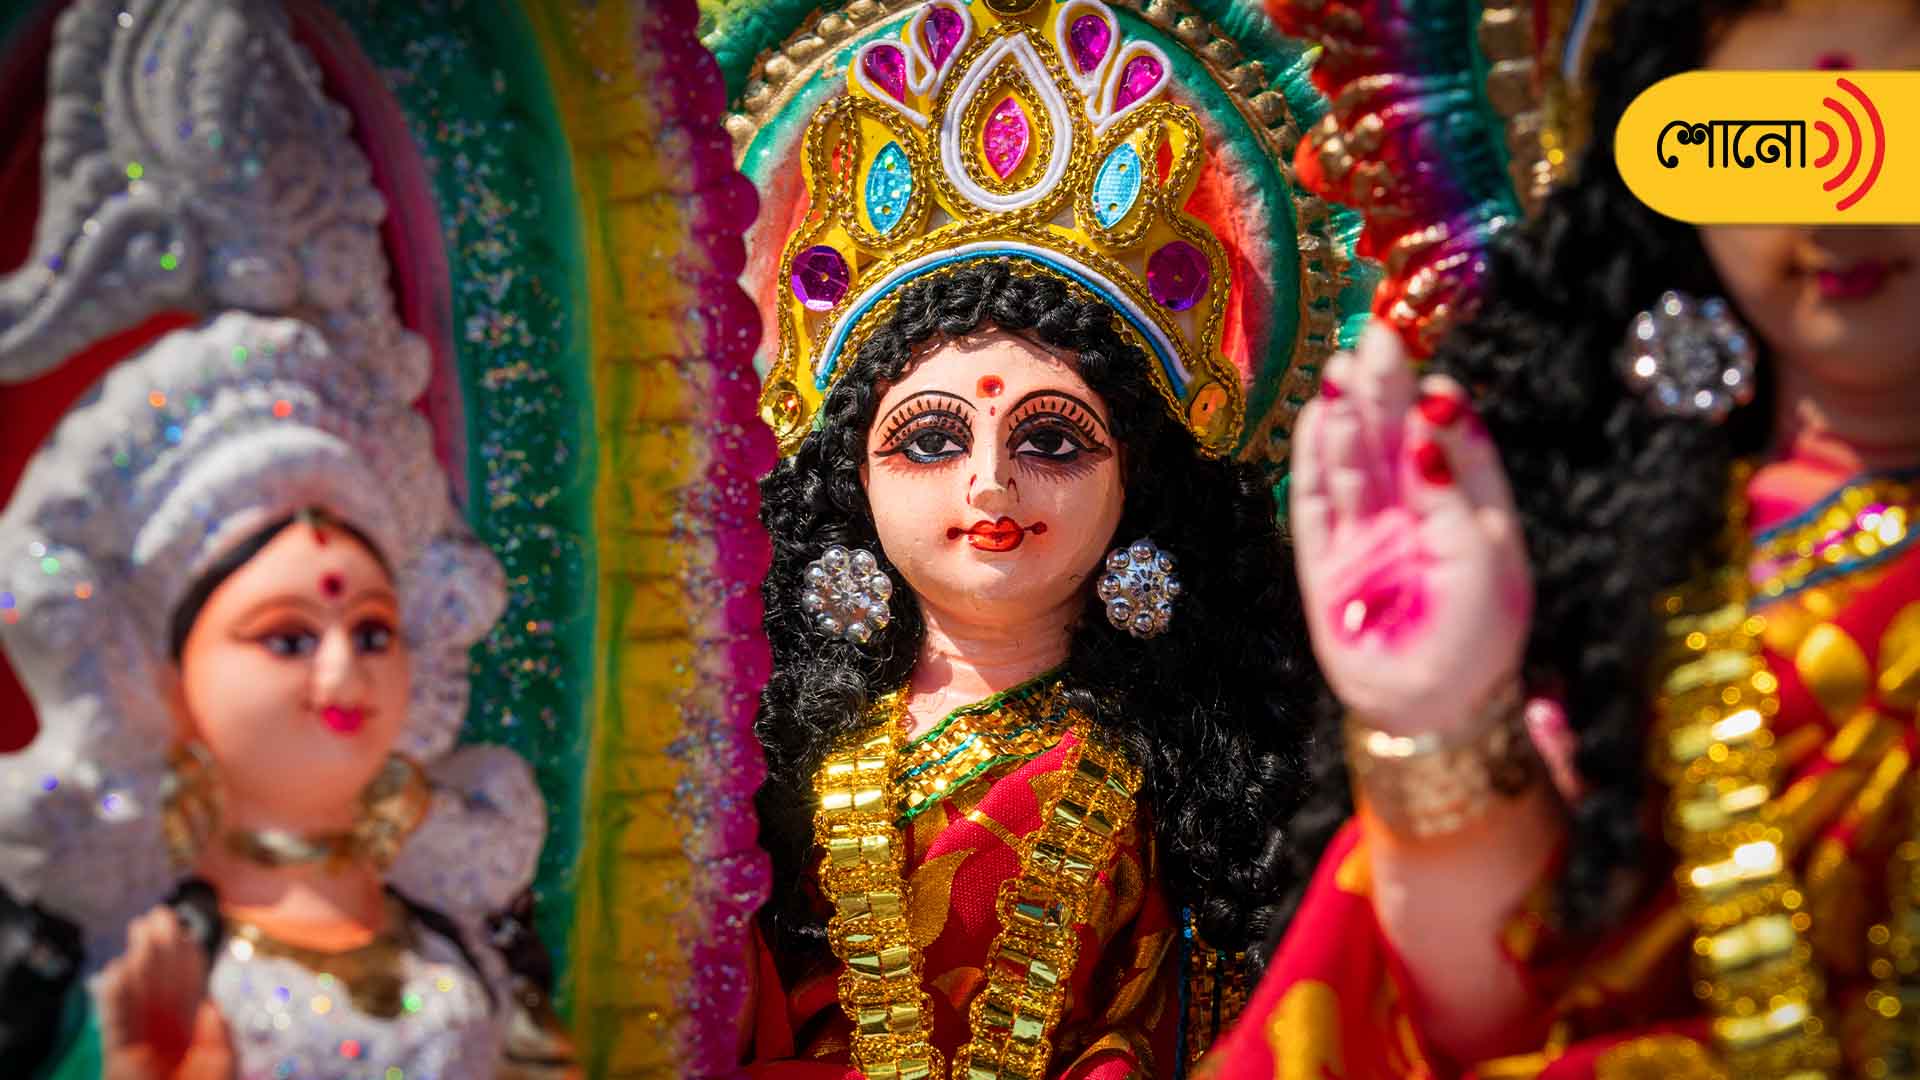 The rituals to be followed in Laxmi Puja